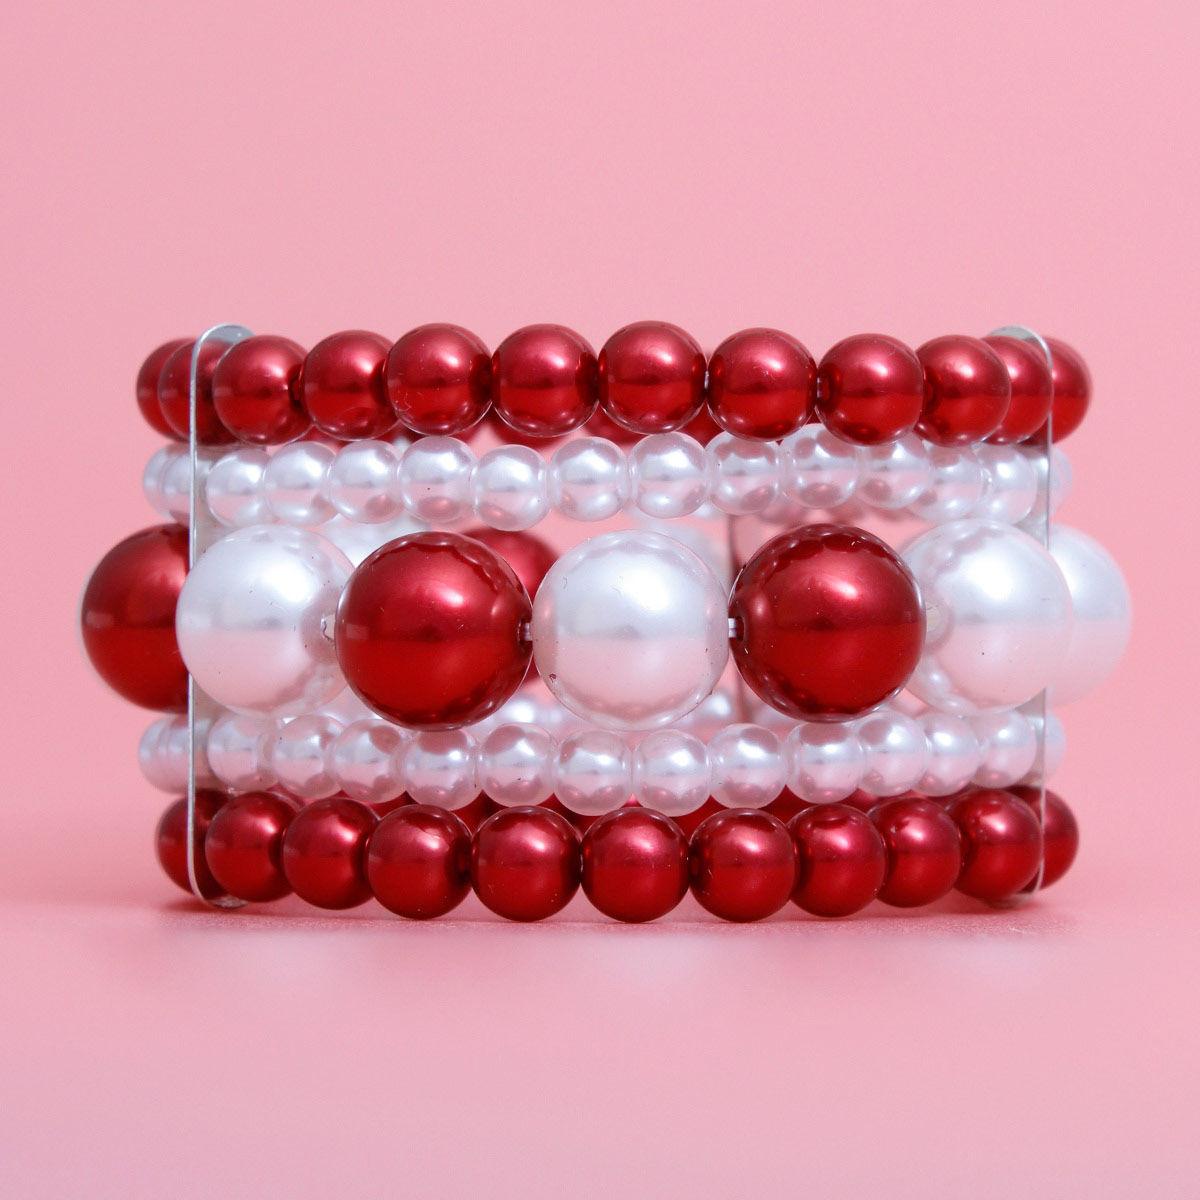 Accessorize with Red & White Pearl Bracelet: Order Today